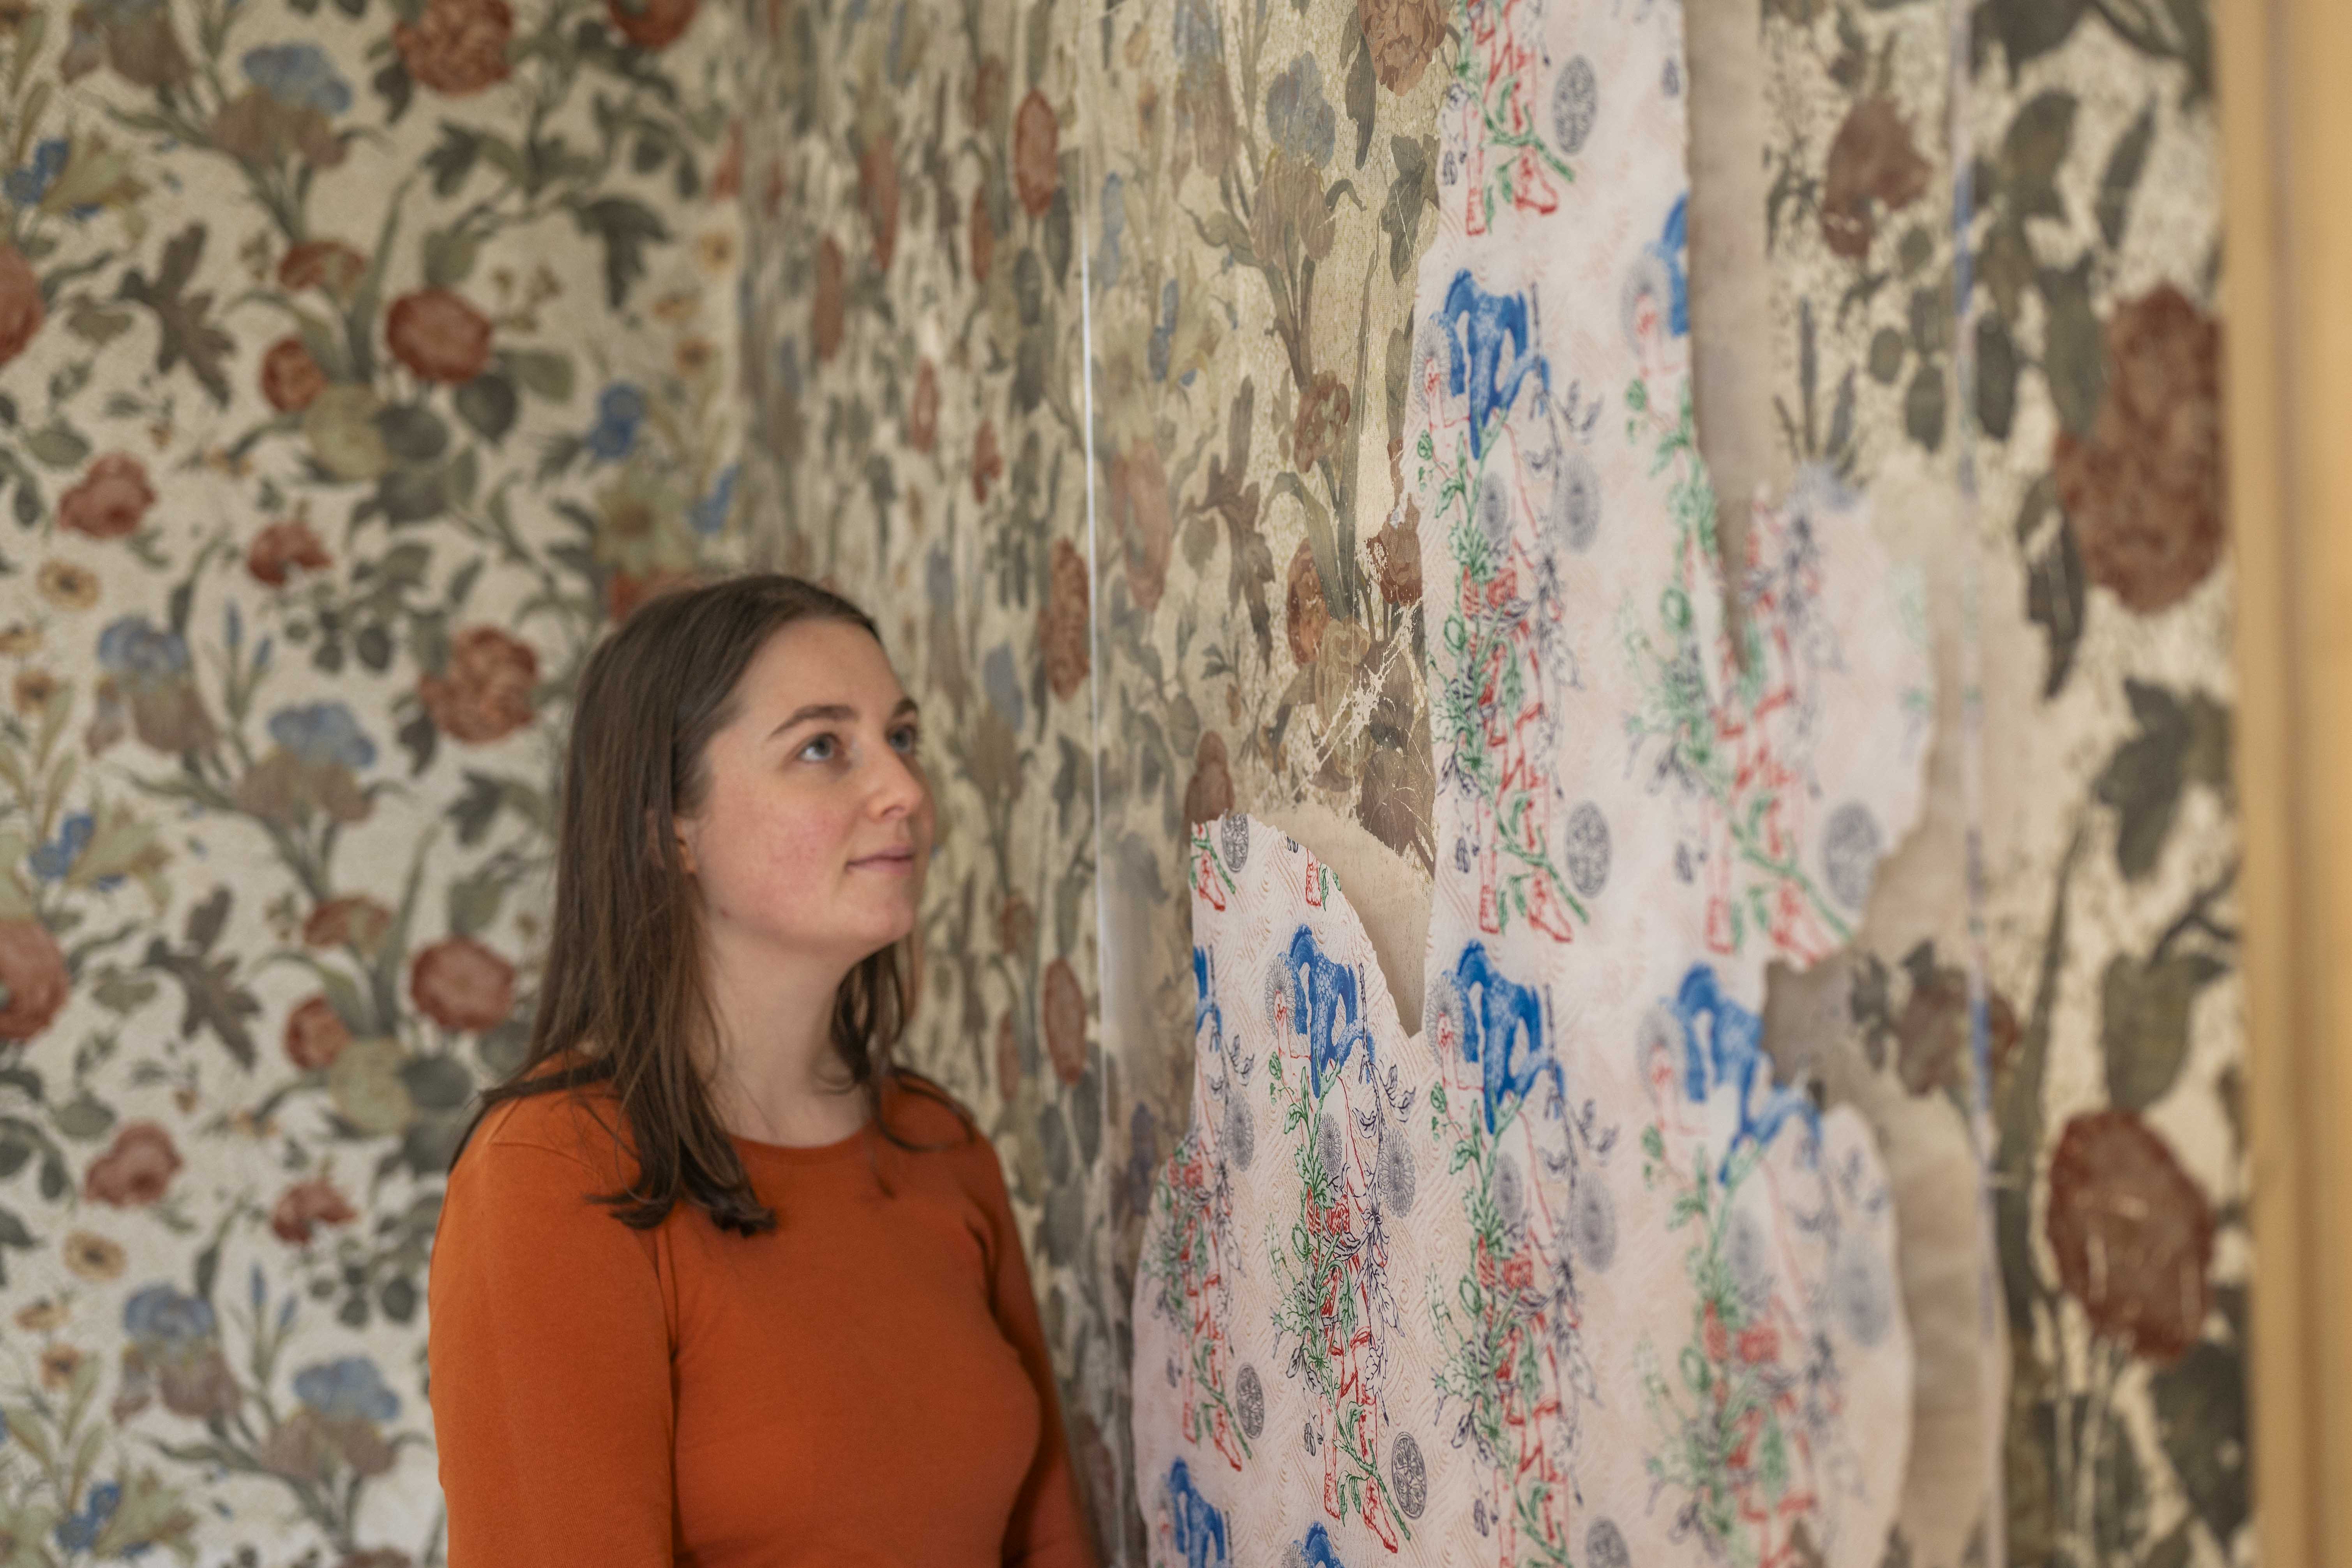 Woman in a room looking towards patterned wallpaper